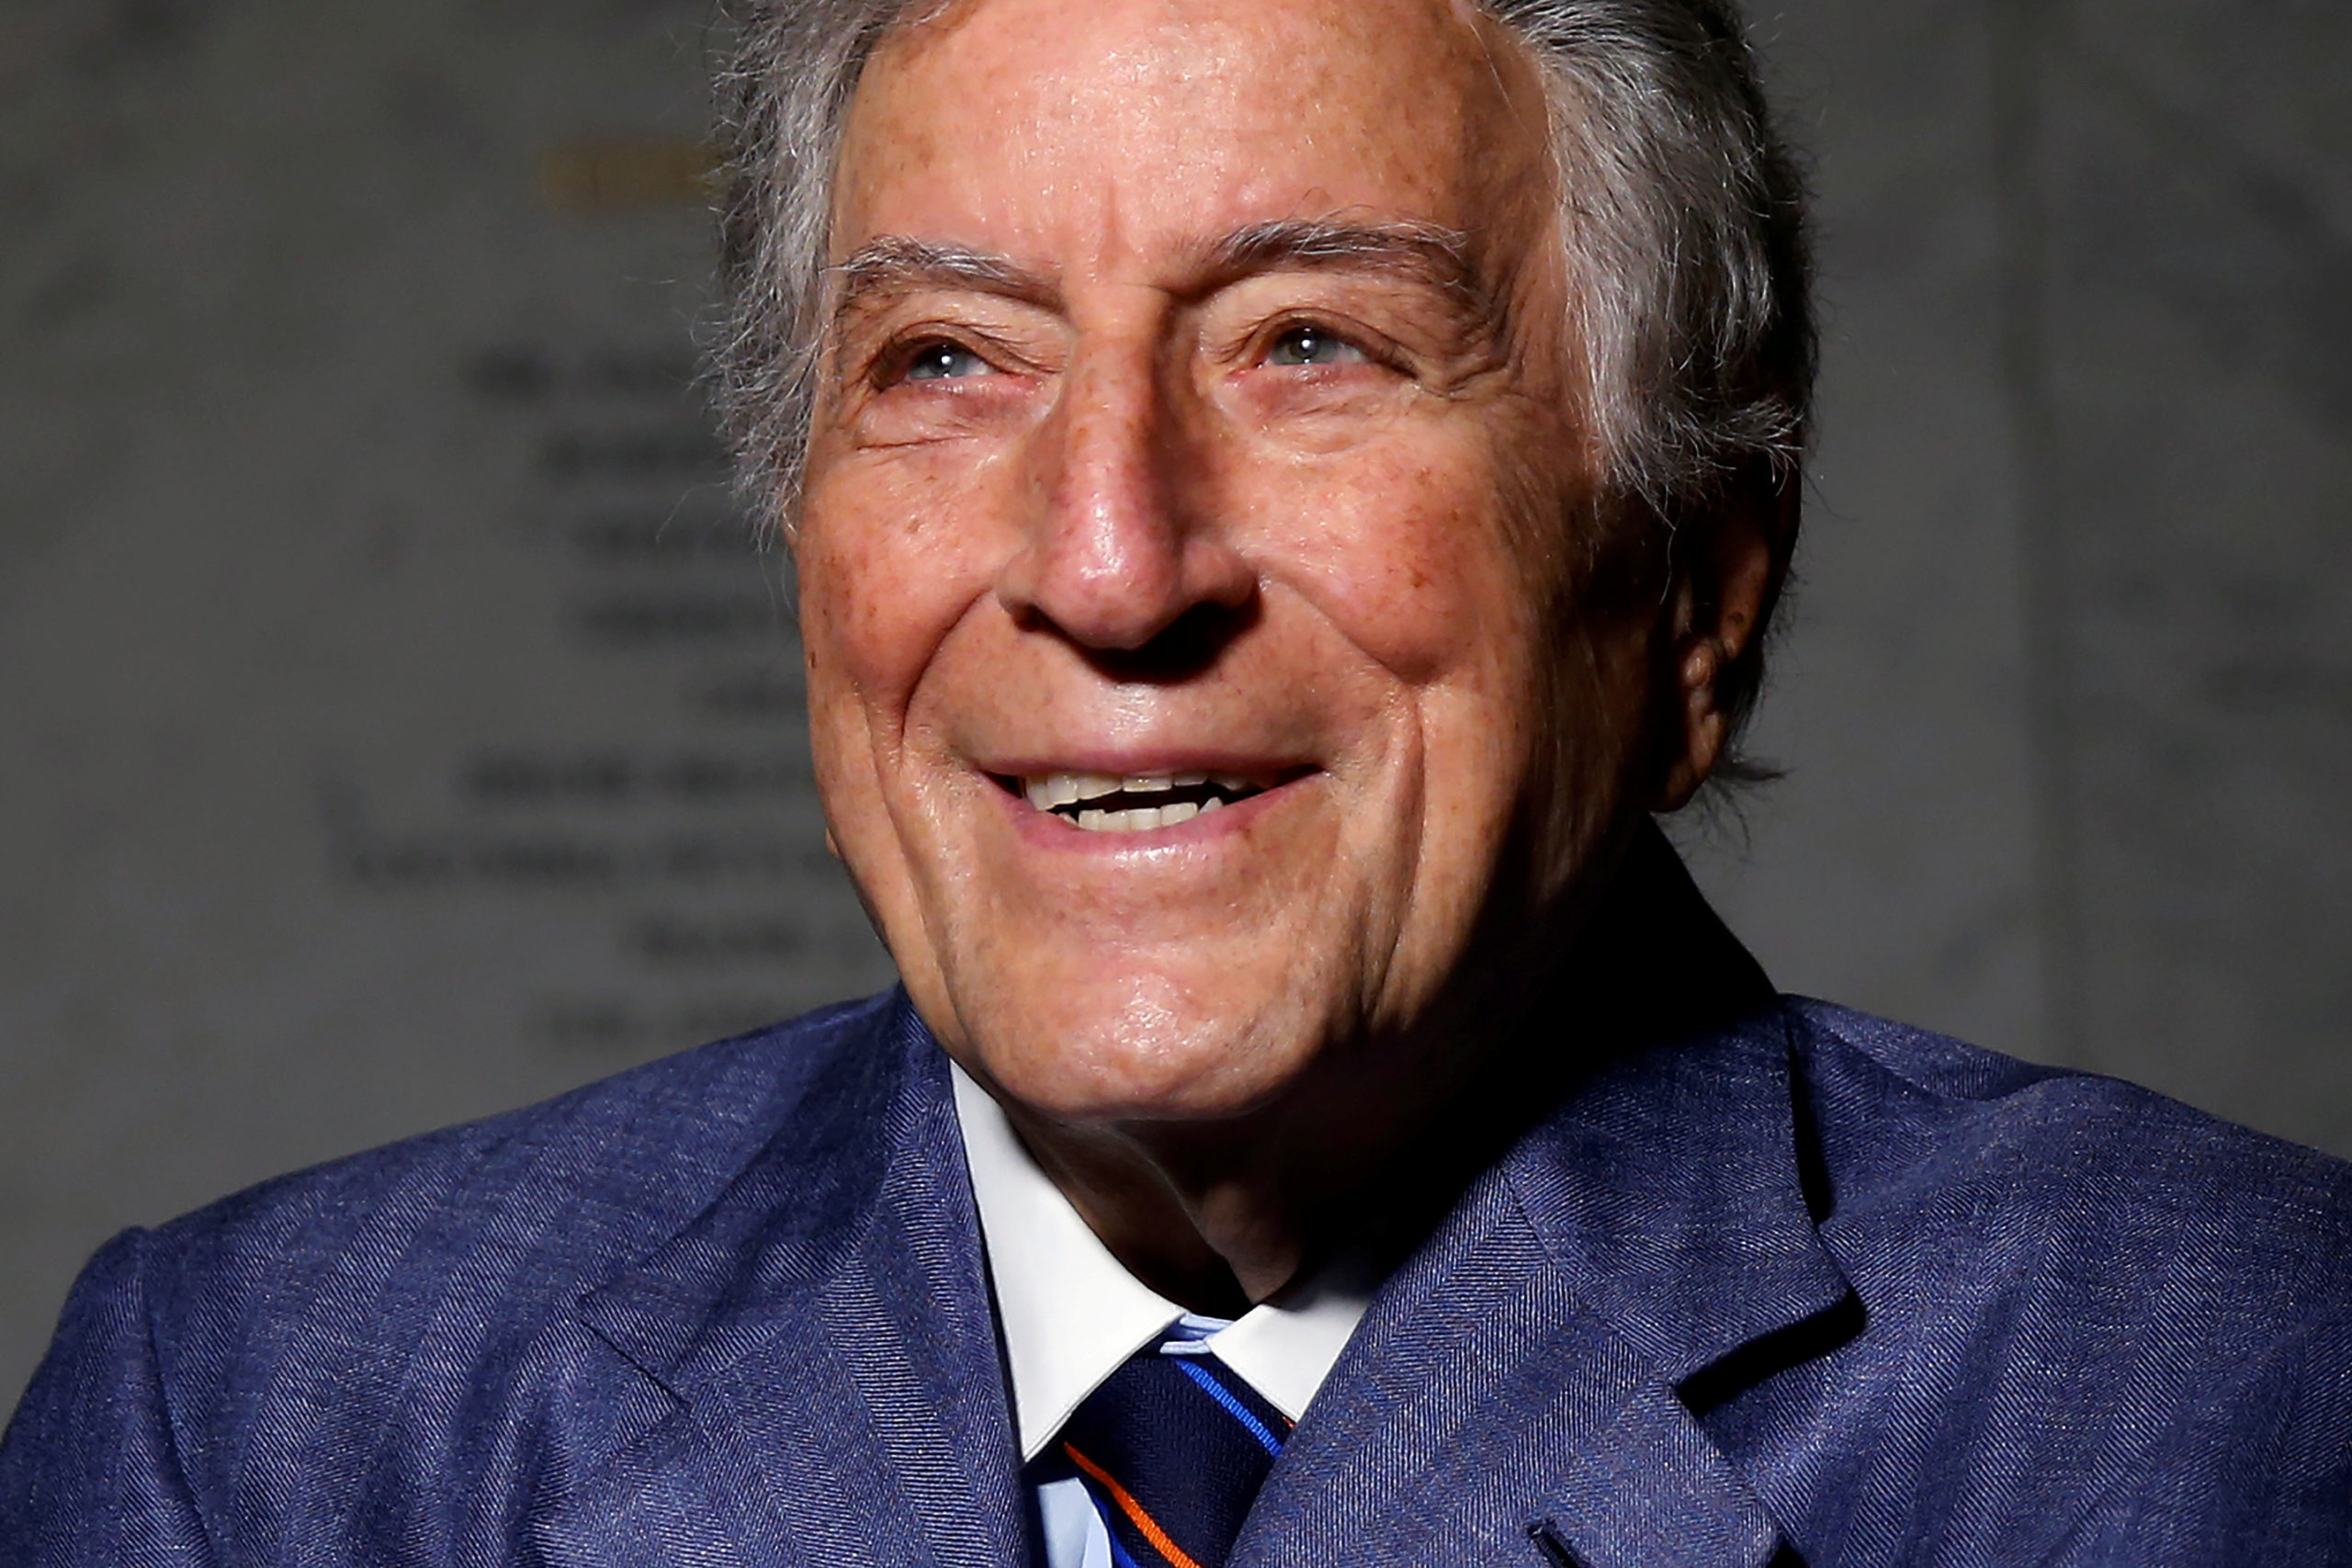 American singer Tony Bennett is stepping back from concert performances at the age of 95, his son said on Friday.